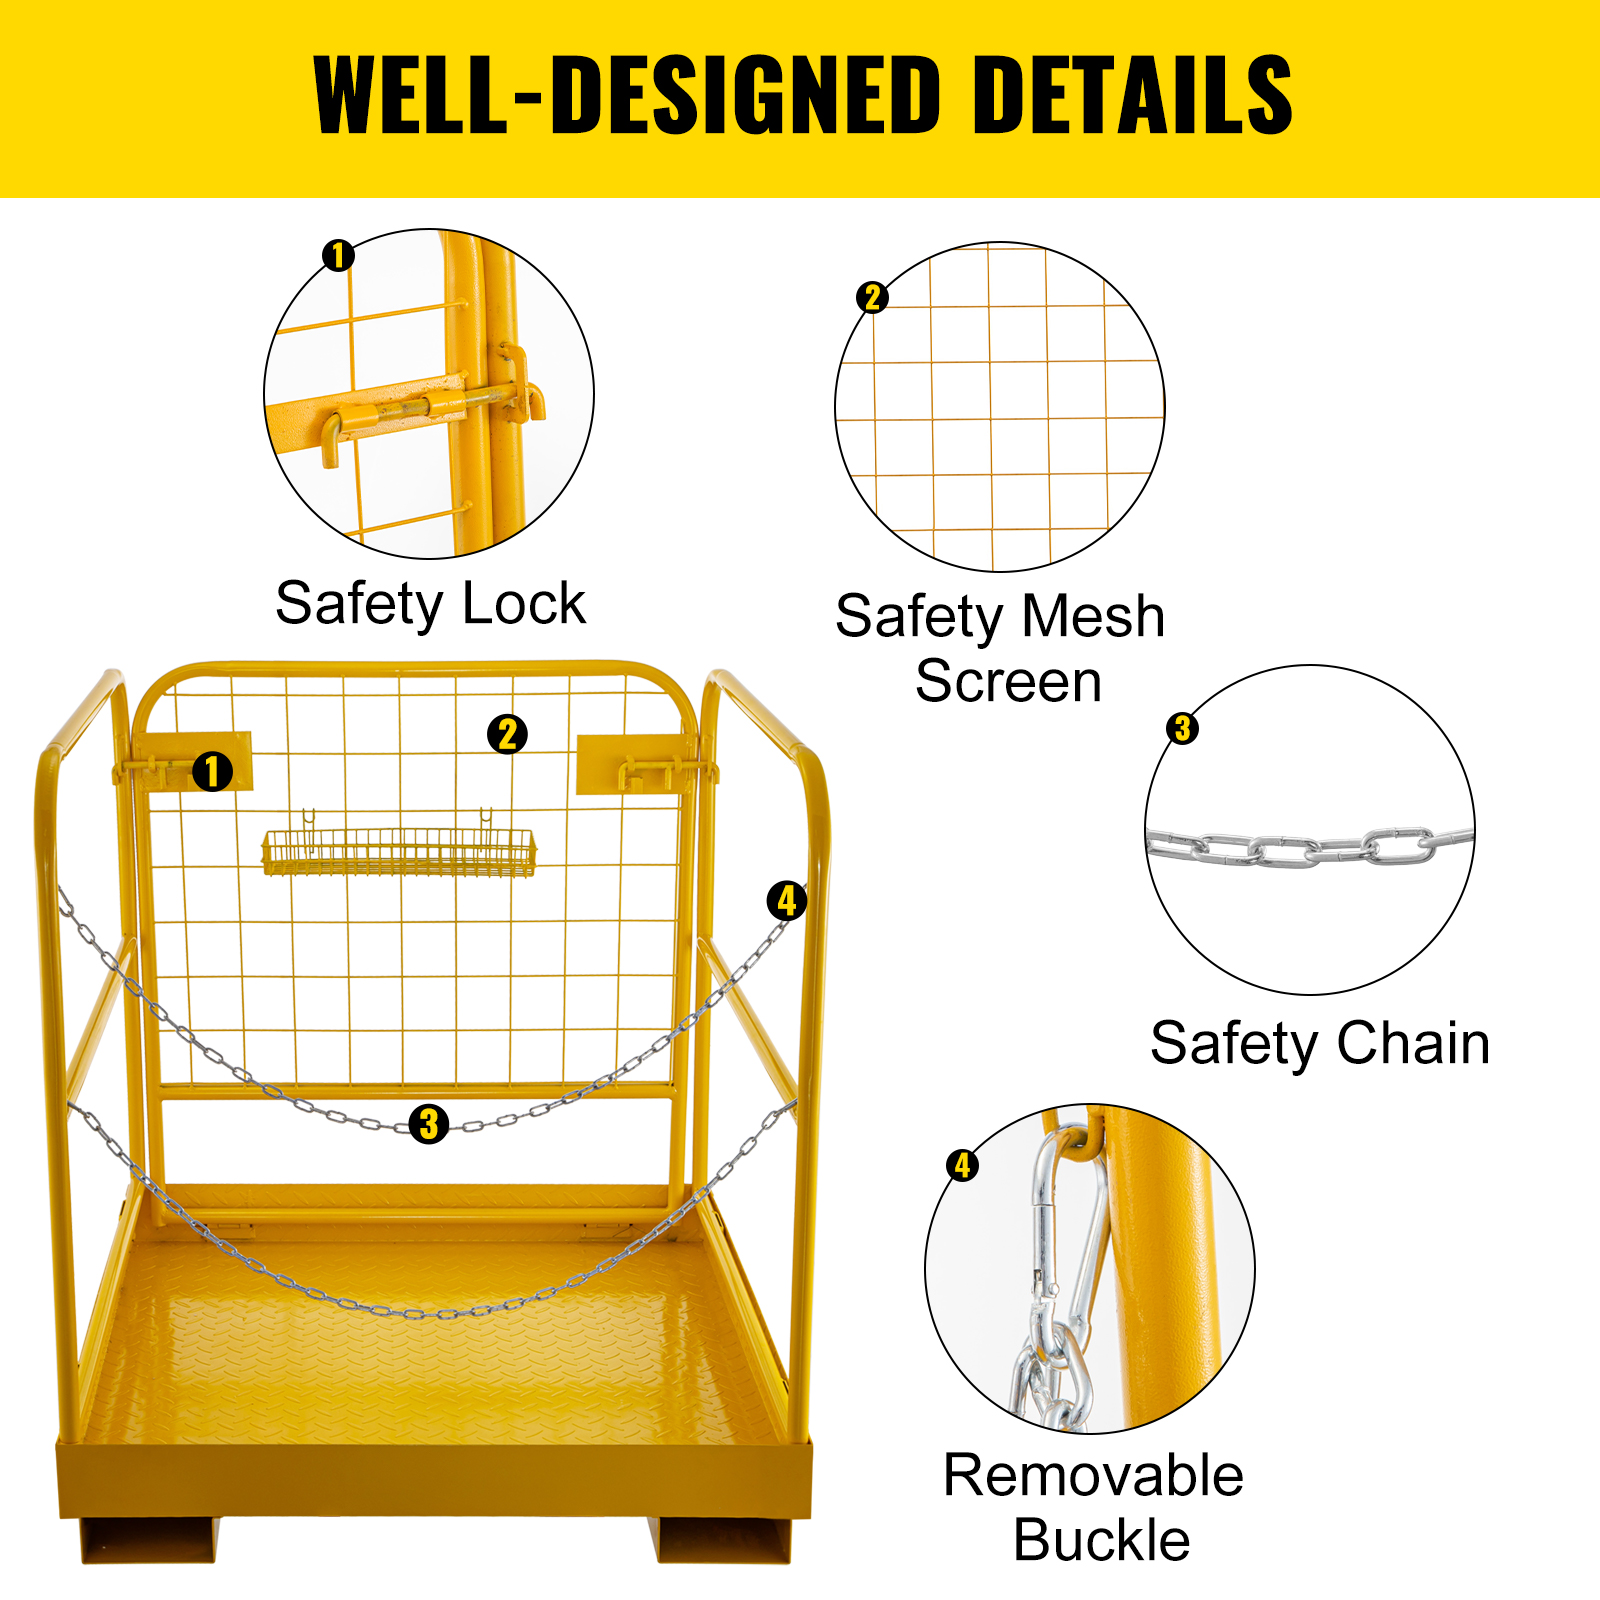 Younar Attachments Forklift Safety Cage Work Platform Heavy Duty Steel 36 x 36 Basket Aerial Lift Fence Rails with Safety Harness 